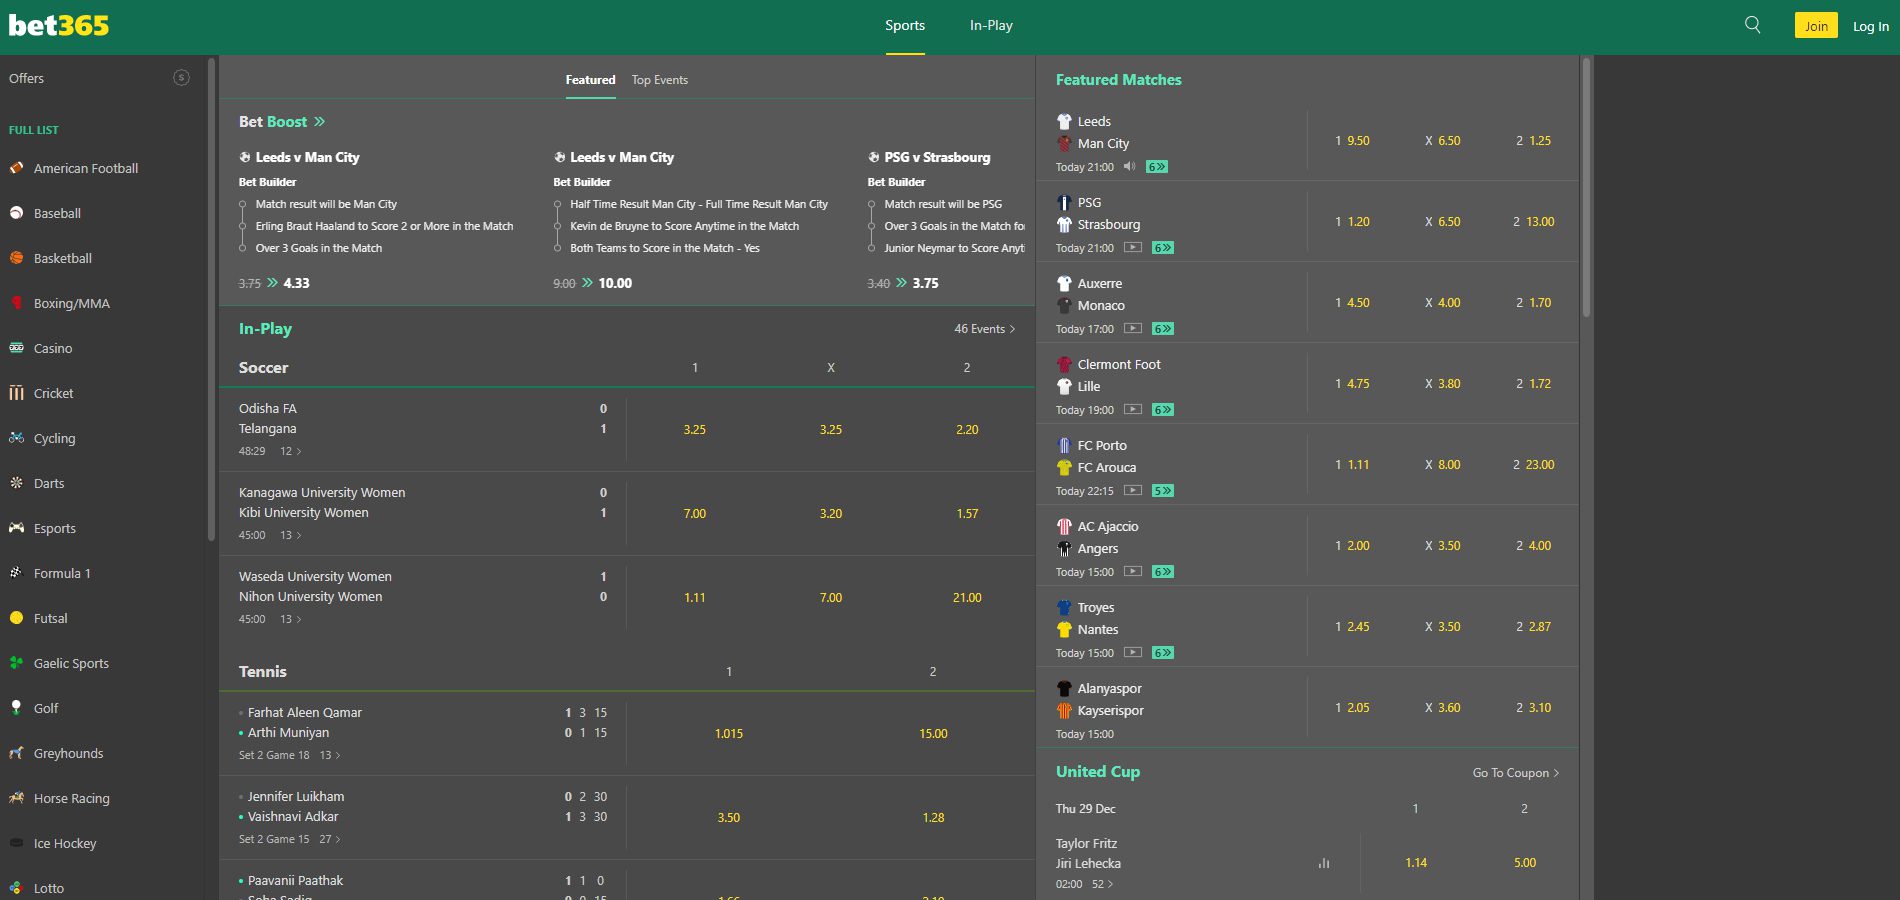 Bet365 - Sports Page